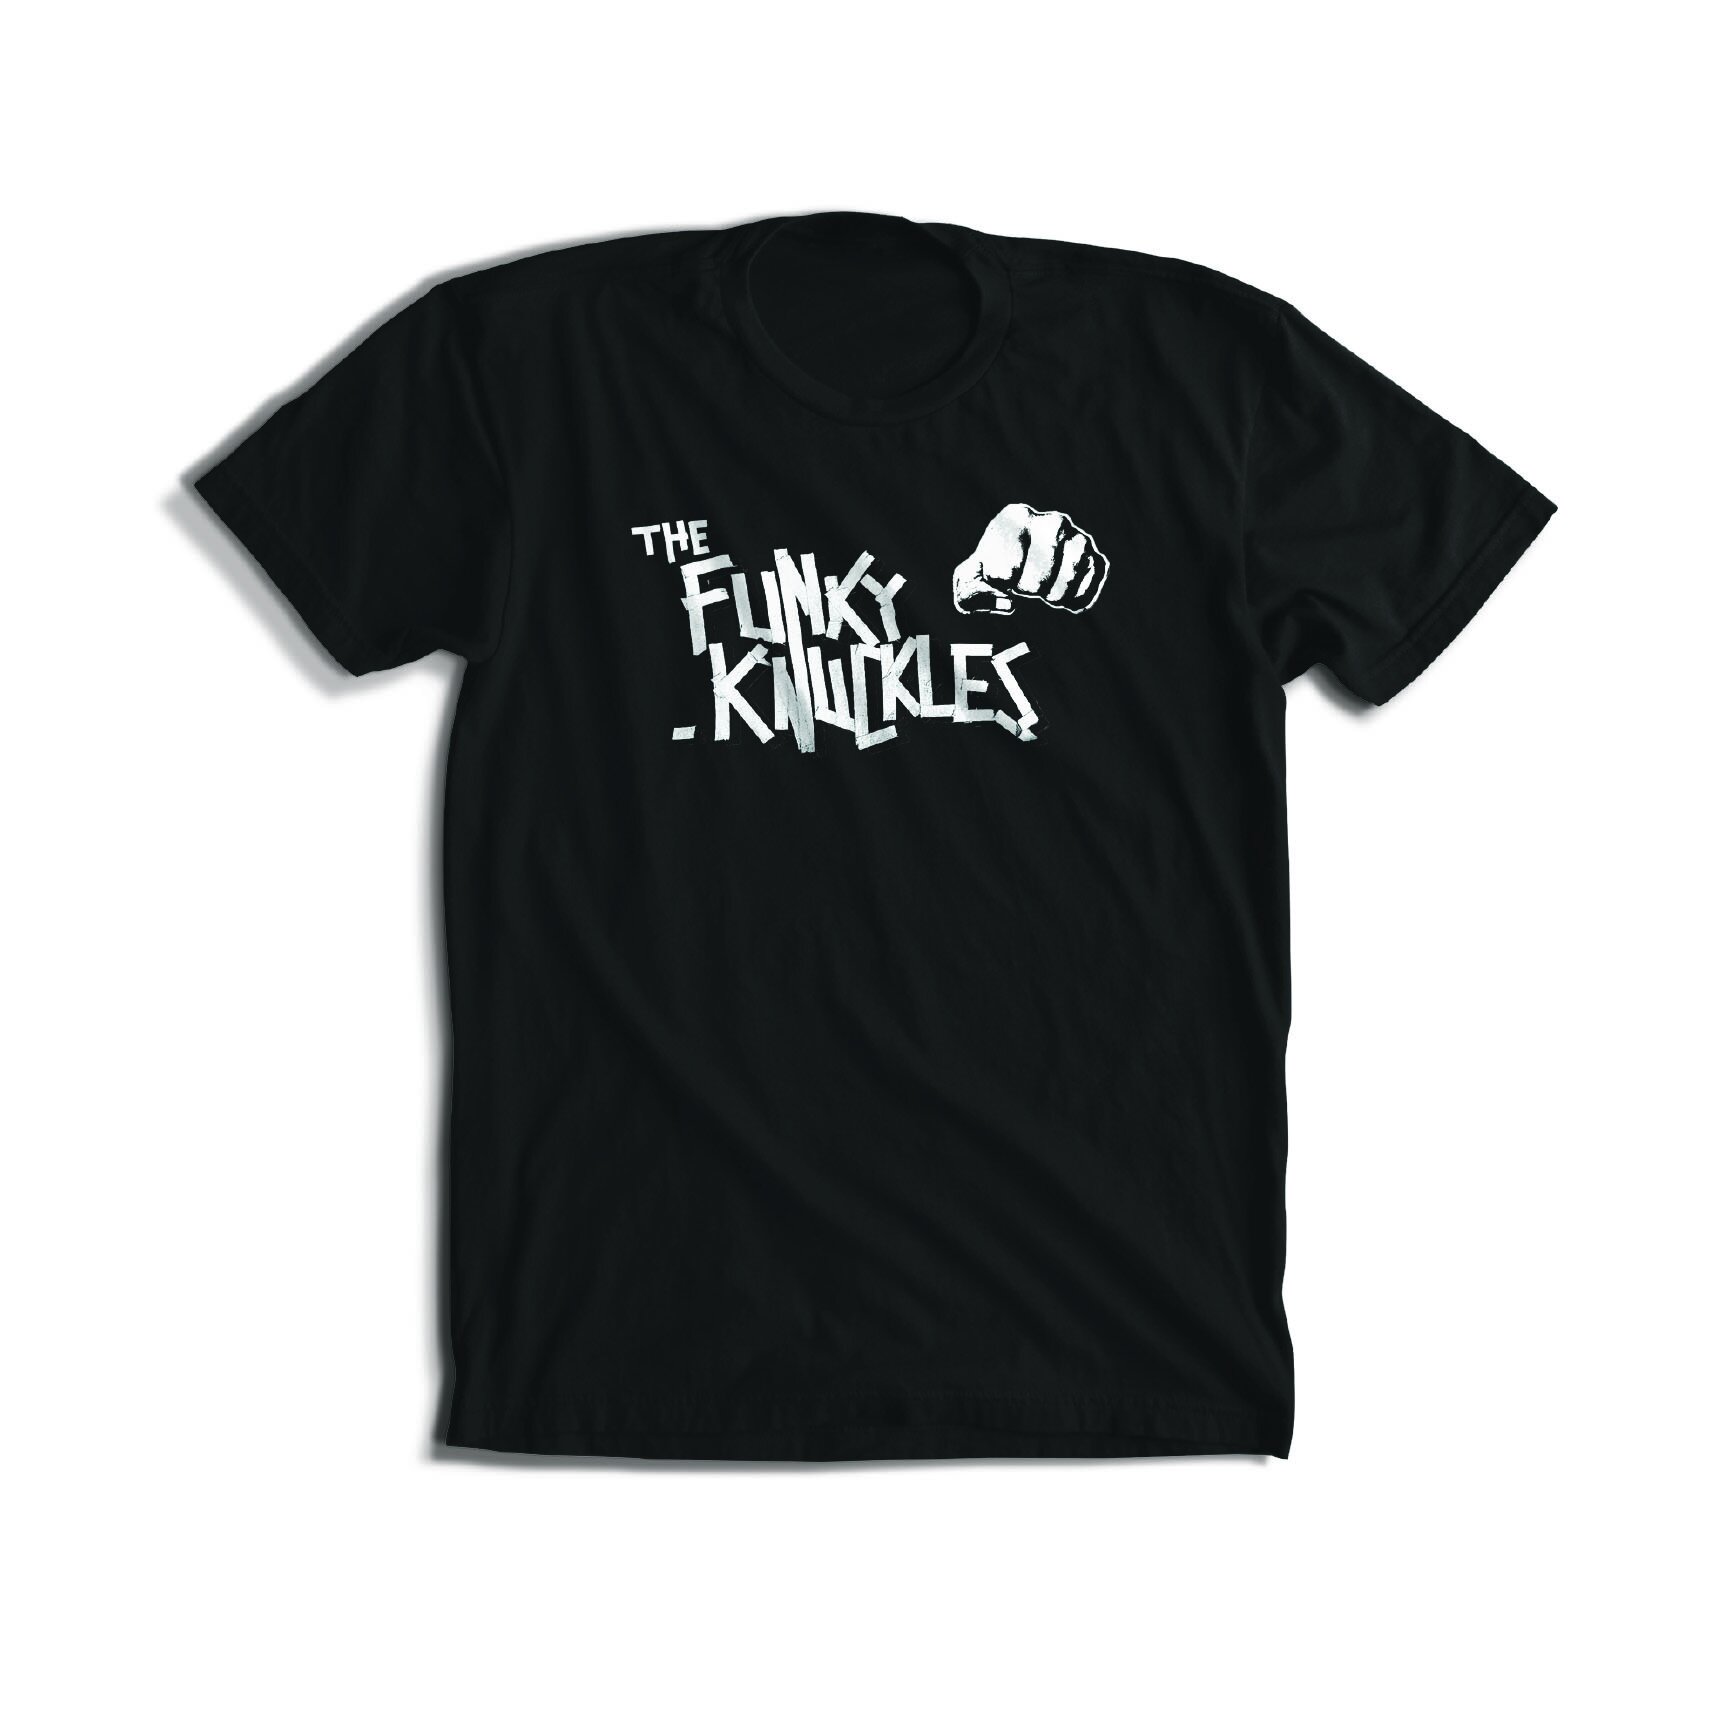 Band Merch  Shop Shirts, CDs & Music — The Funky Knuckles